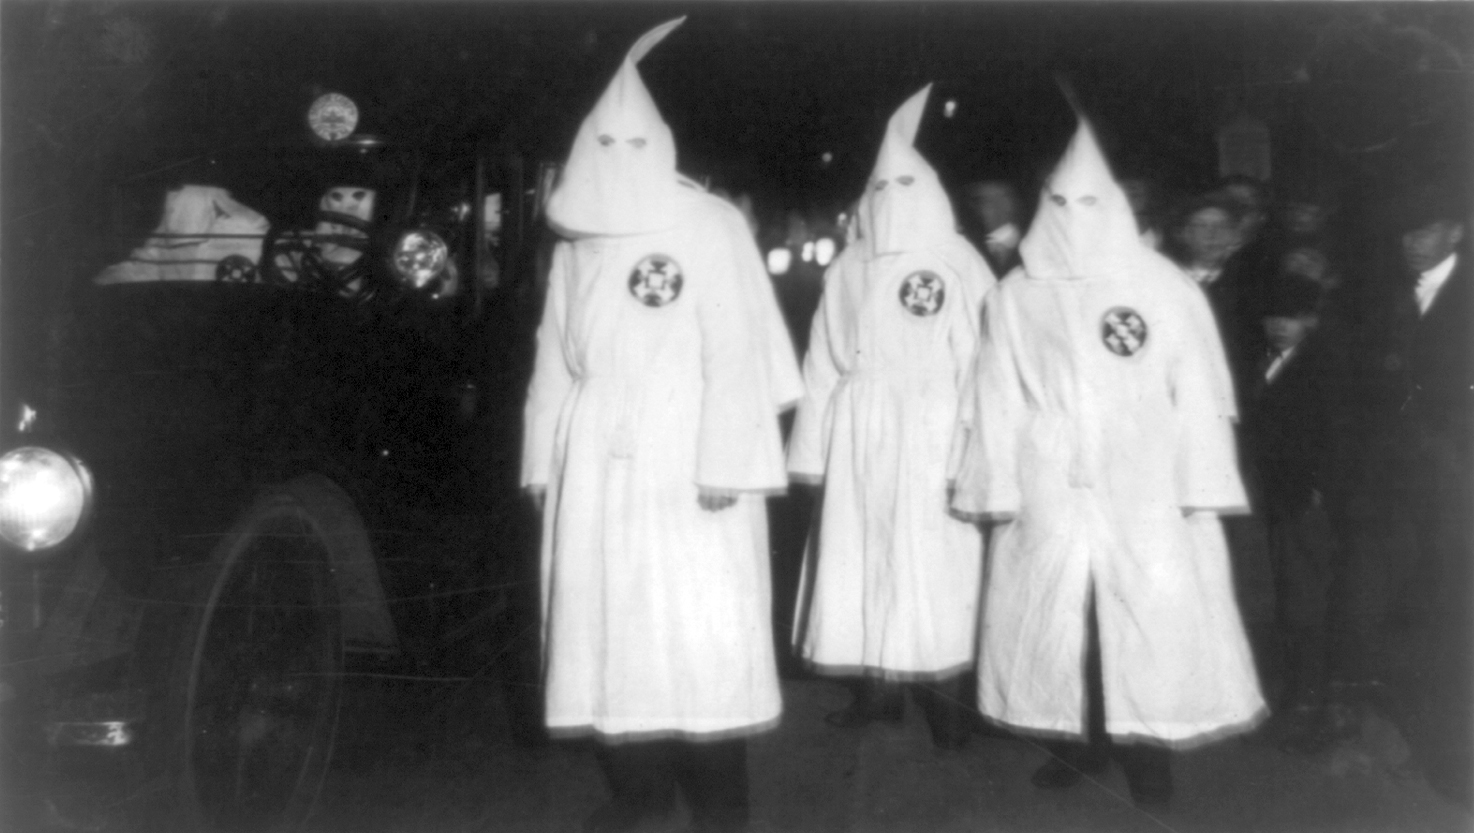 Even back in 1922 the KKK still refused to adhere to social, fashion norms.